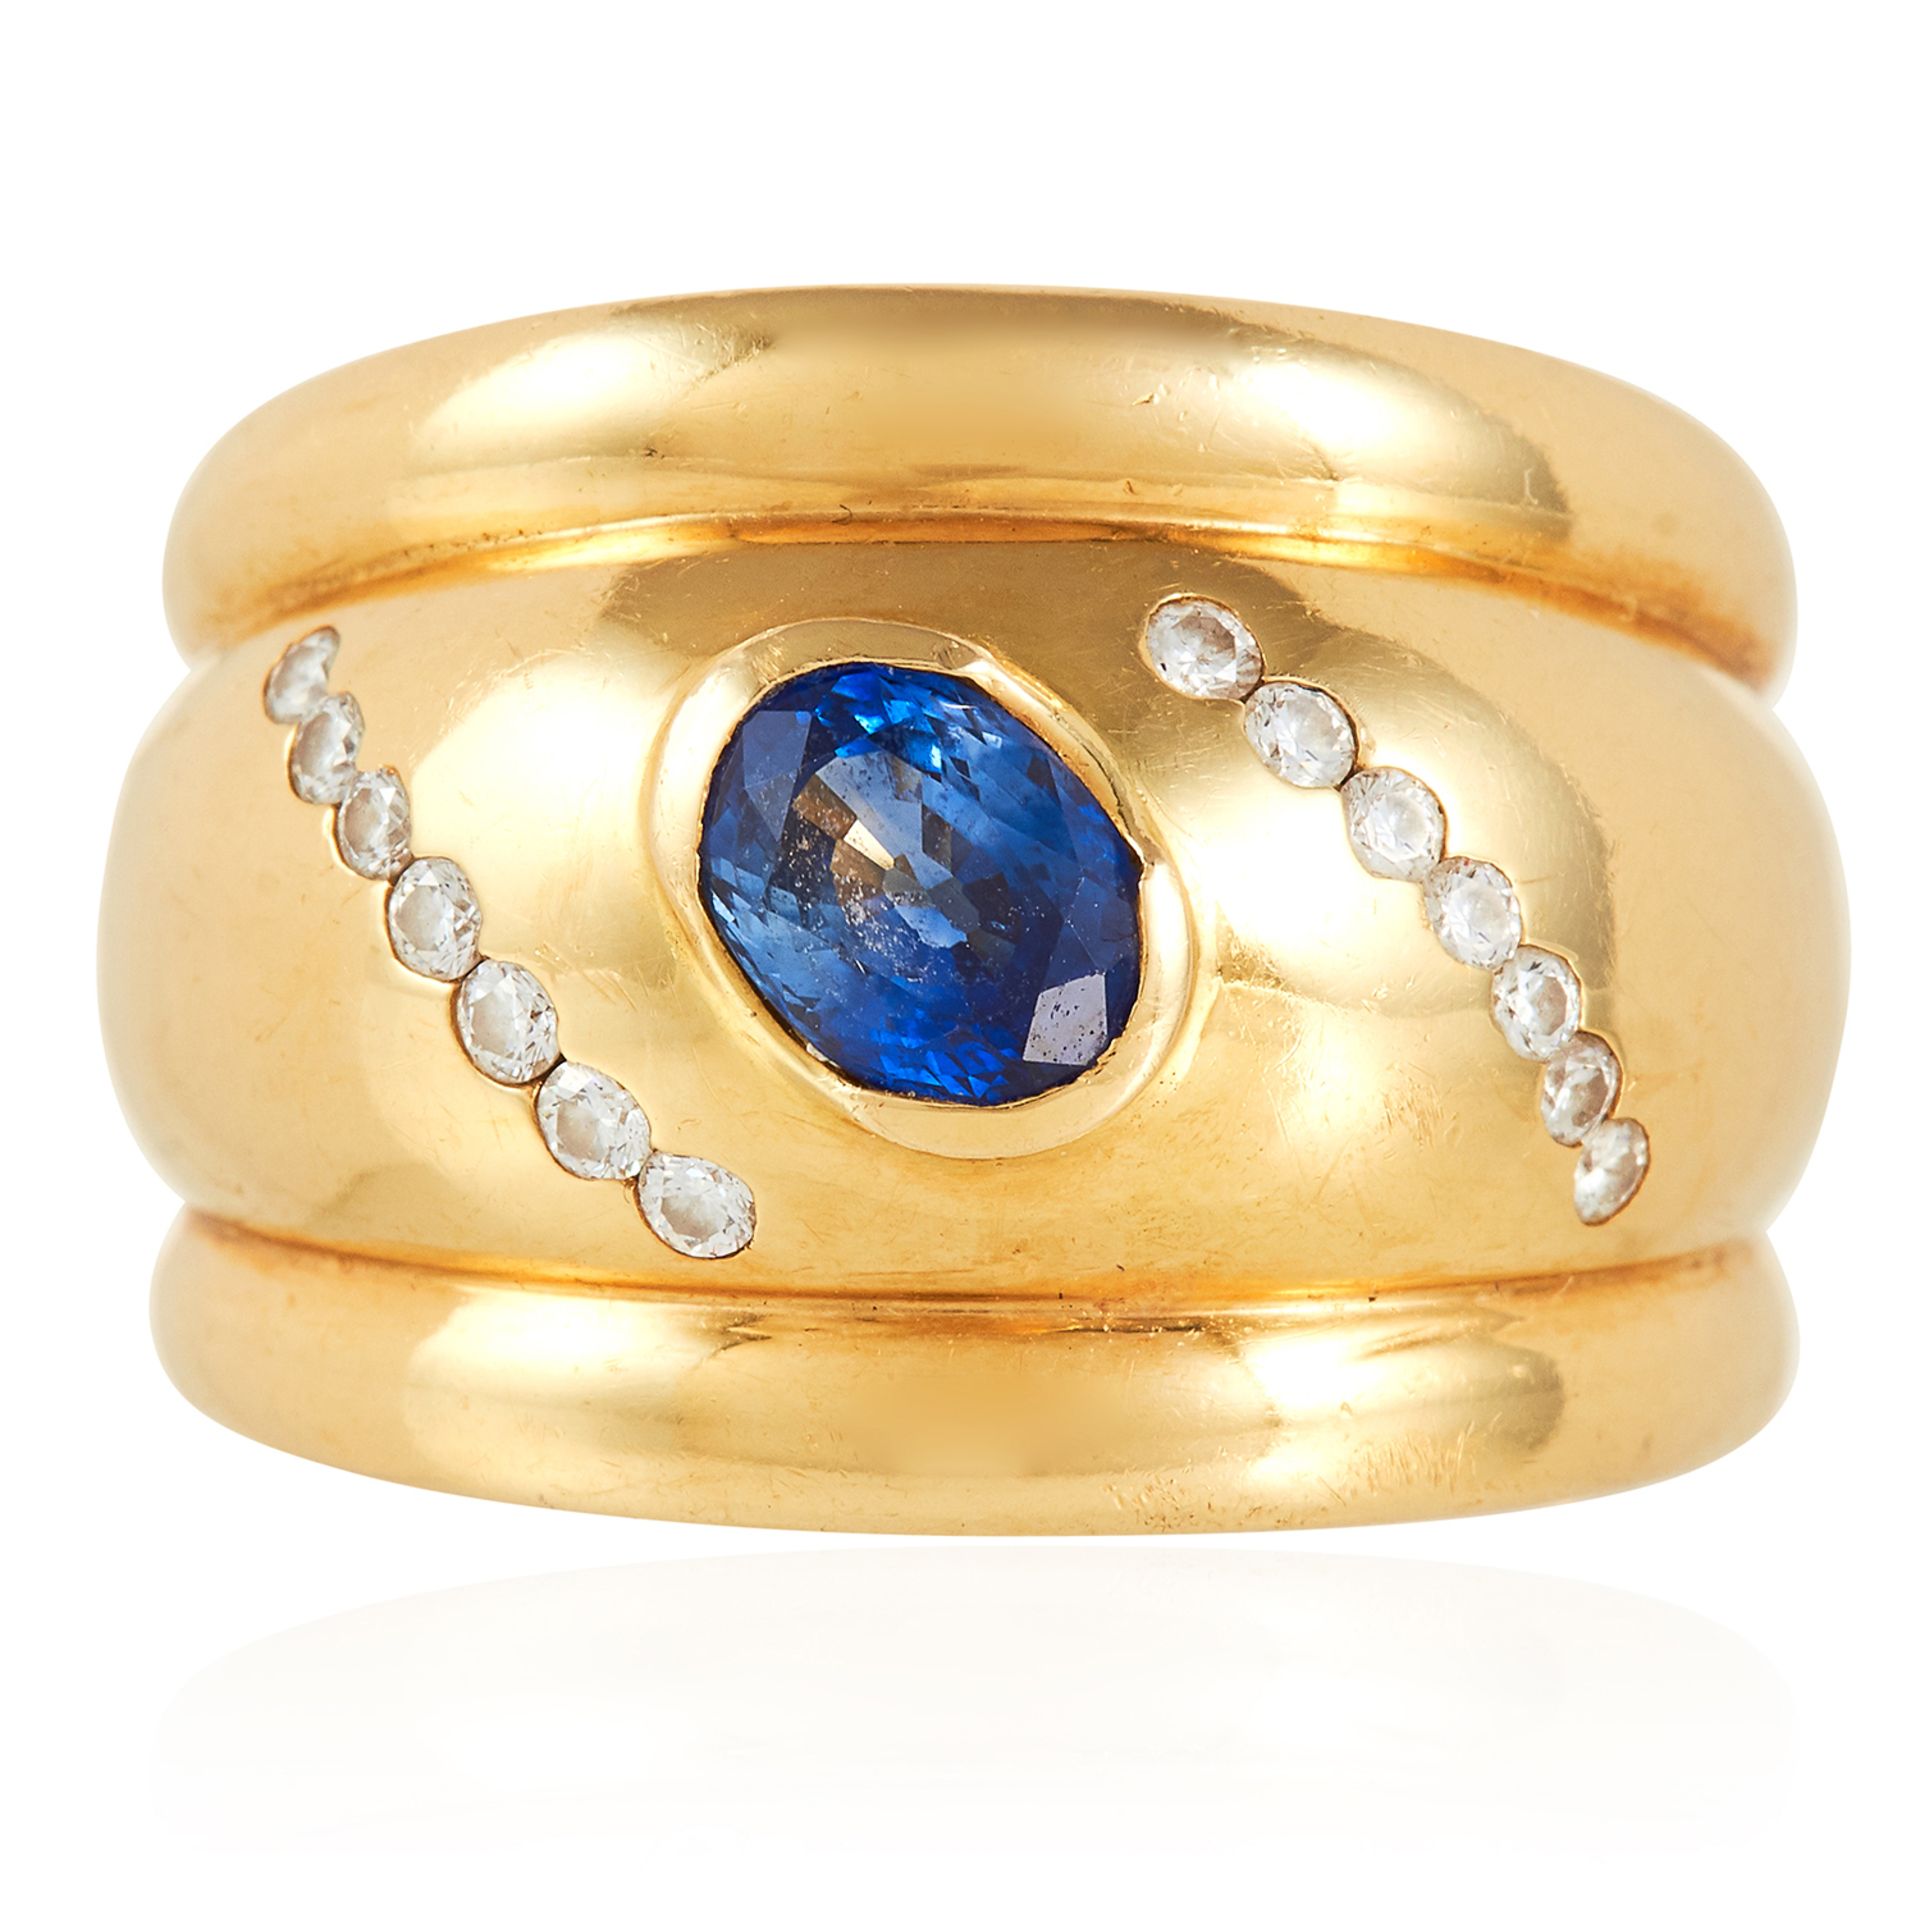 A SAPPHIRE AND DIAMOND DRESS RING in 18ct yellow gold, in thick gold band, set with an oval cut